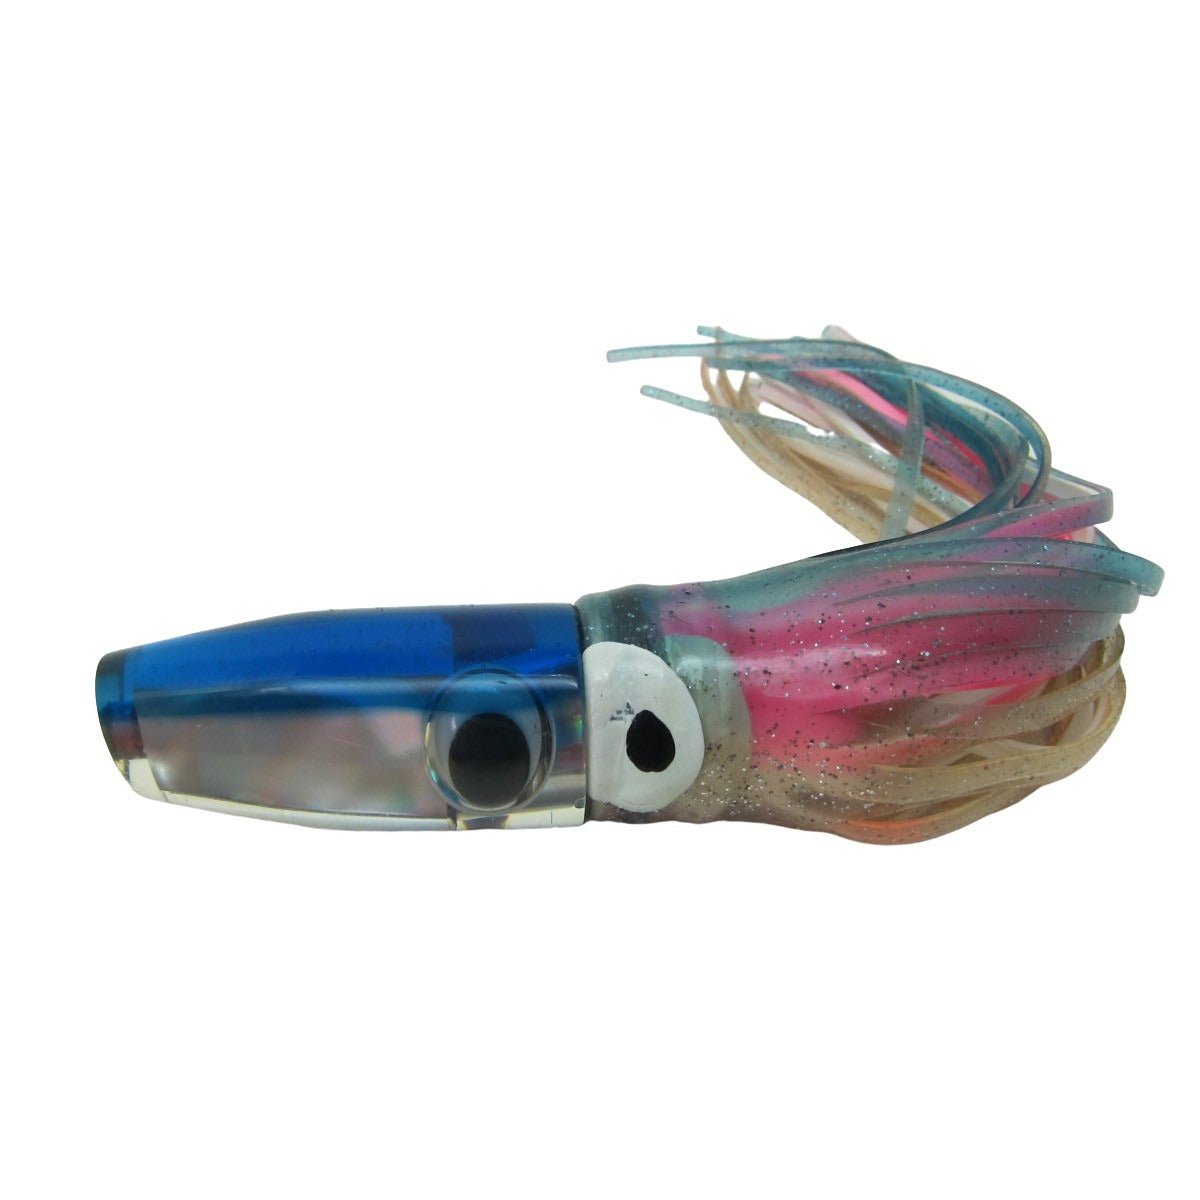 Marlin Magic Lures - Used -In Stock Now. Shop all New and Used Saltwater  Tackle Offshore Trolling Lures - BGLH